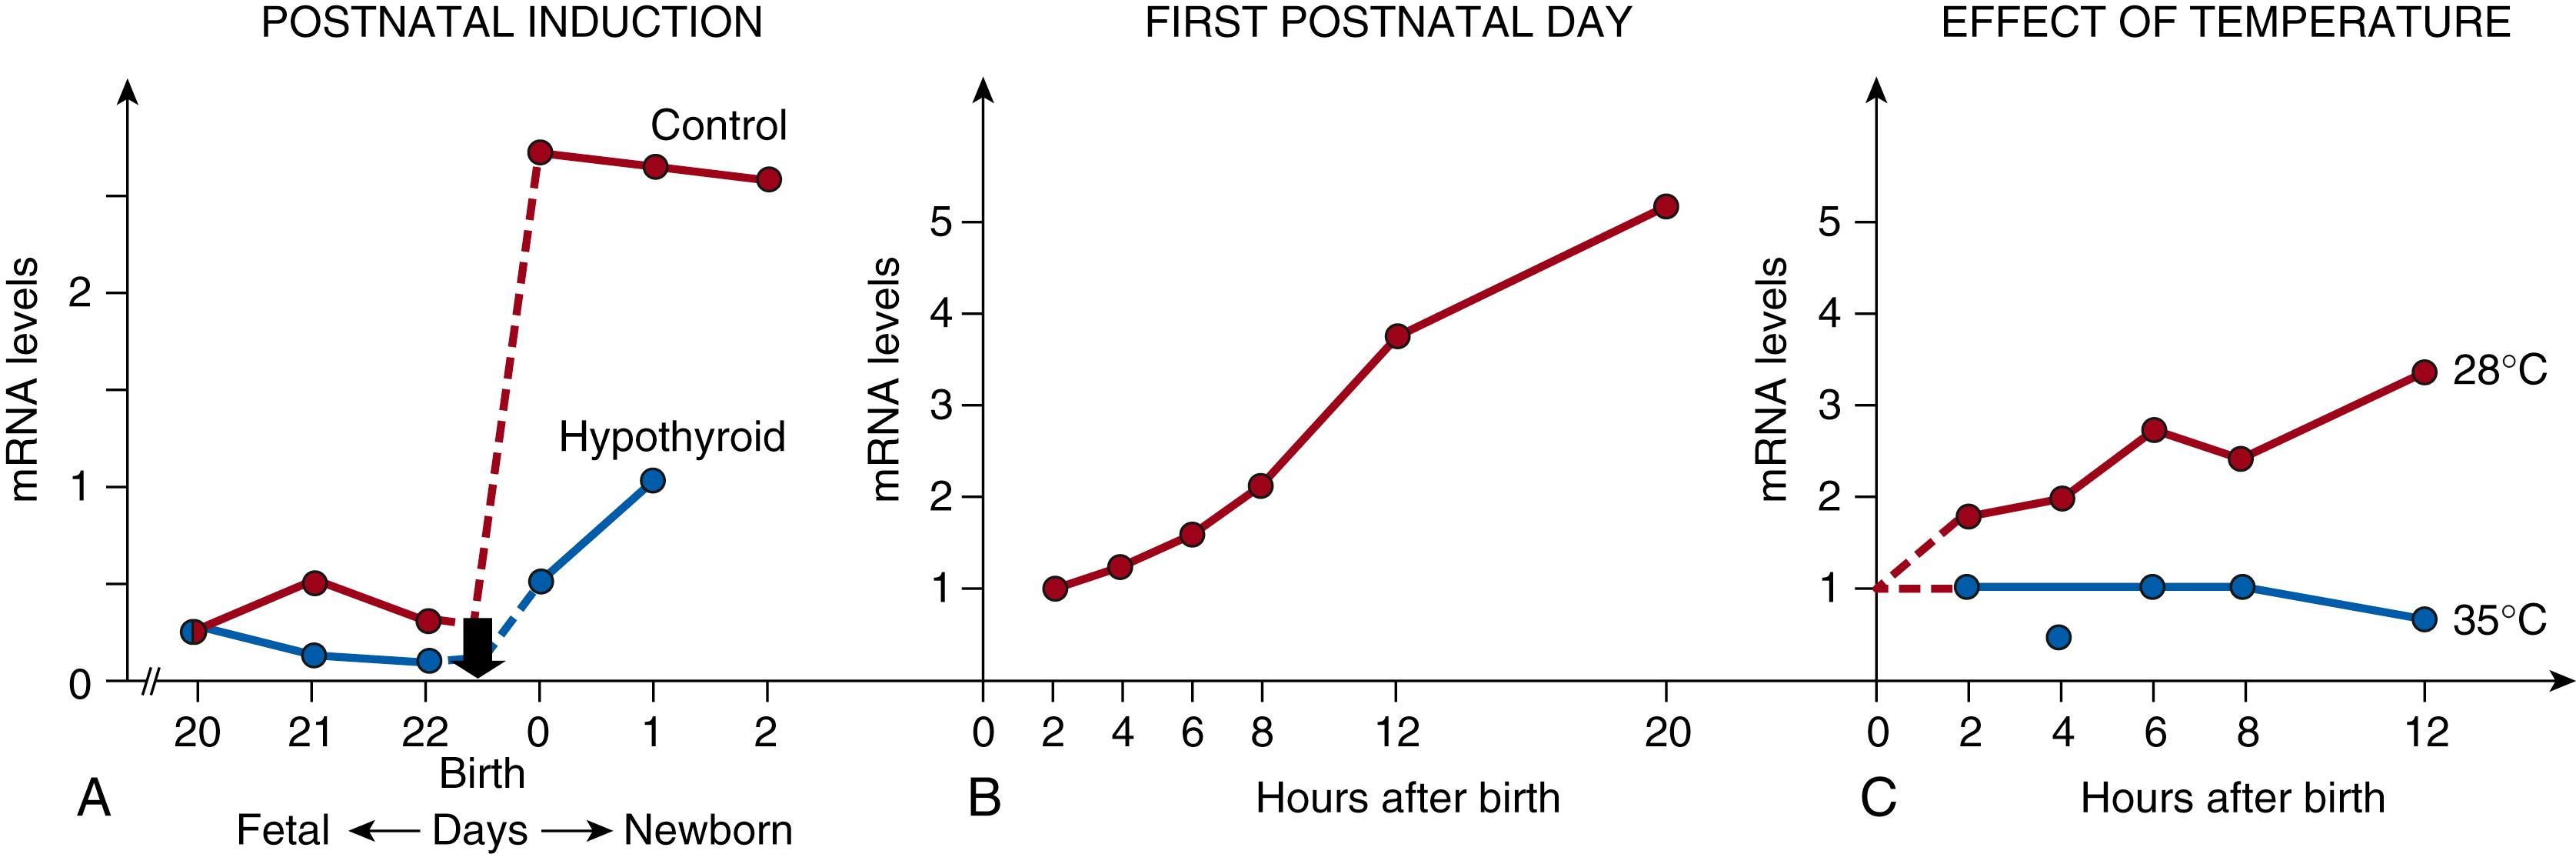 Fig. 32.4, Postnatal increase in uncoupling protein-1 (UCP1) messenger RNA (mRNA) . (A) Prenatal to postnatal transition; note the effect of hypothyroidism. (B) Time resolution of the first postnatal day. Pups remained with their dams. (C) Effect of temperature on the postnatal increase in UCP1 mRNA. Pups were exposed individually to the indicated environmental temperatures.